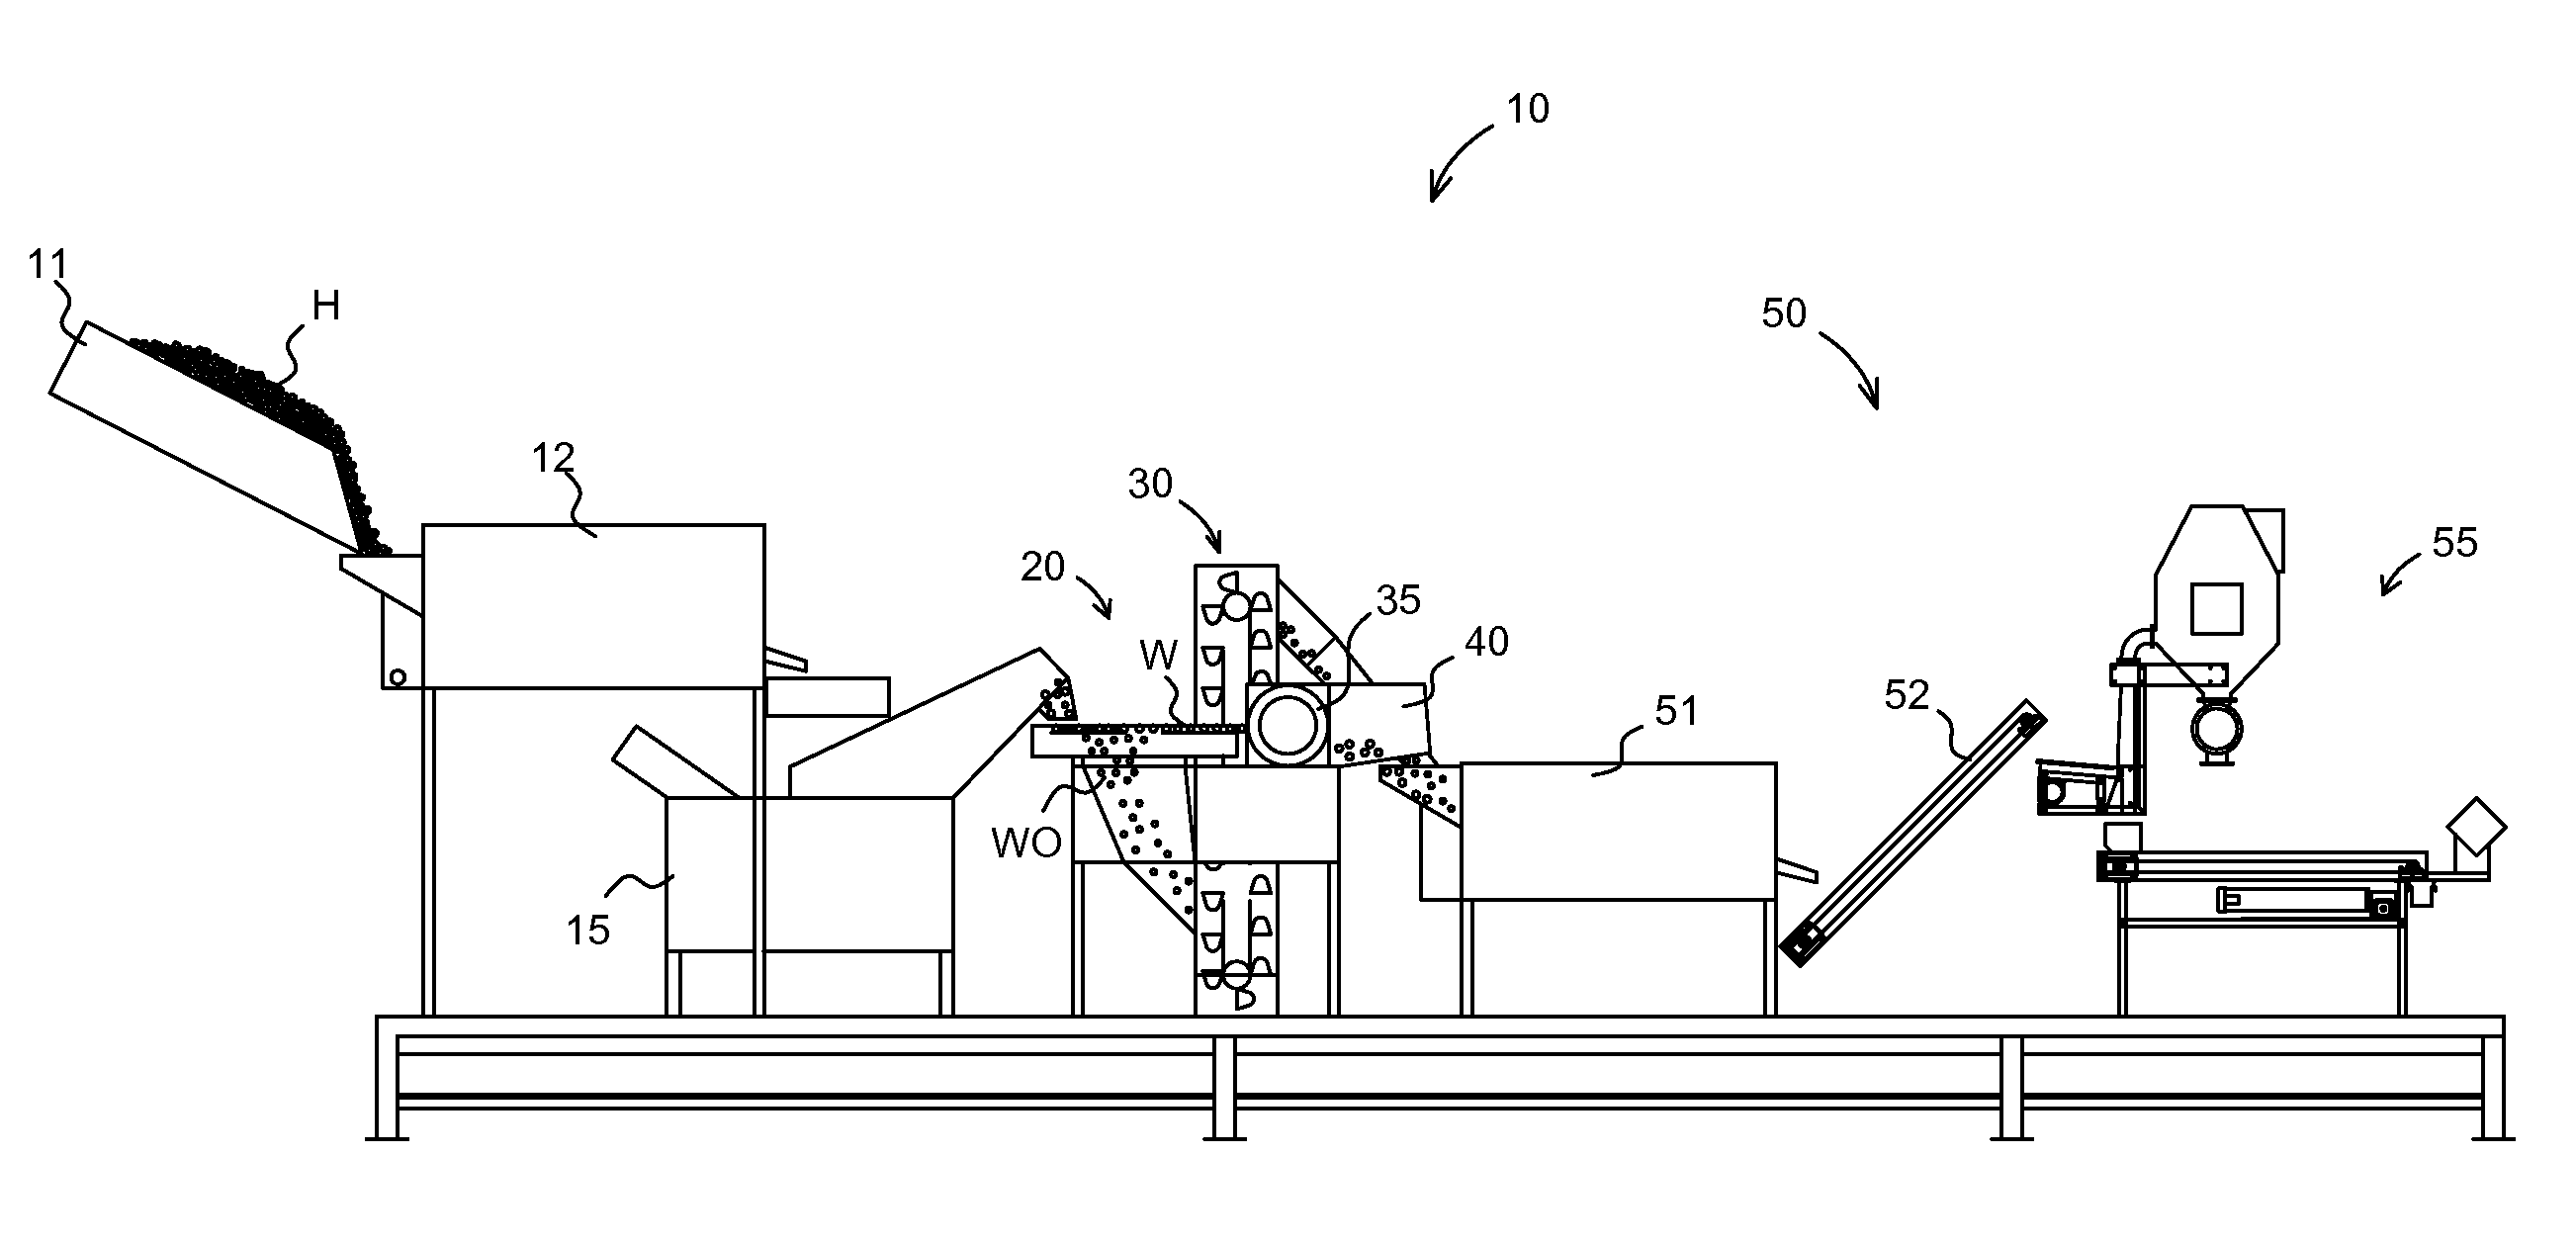 System, device and method for processing harvested walnuts